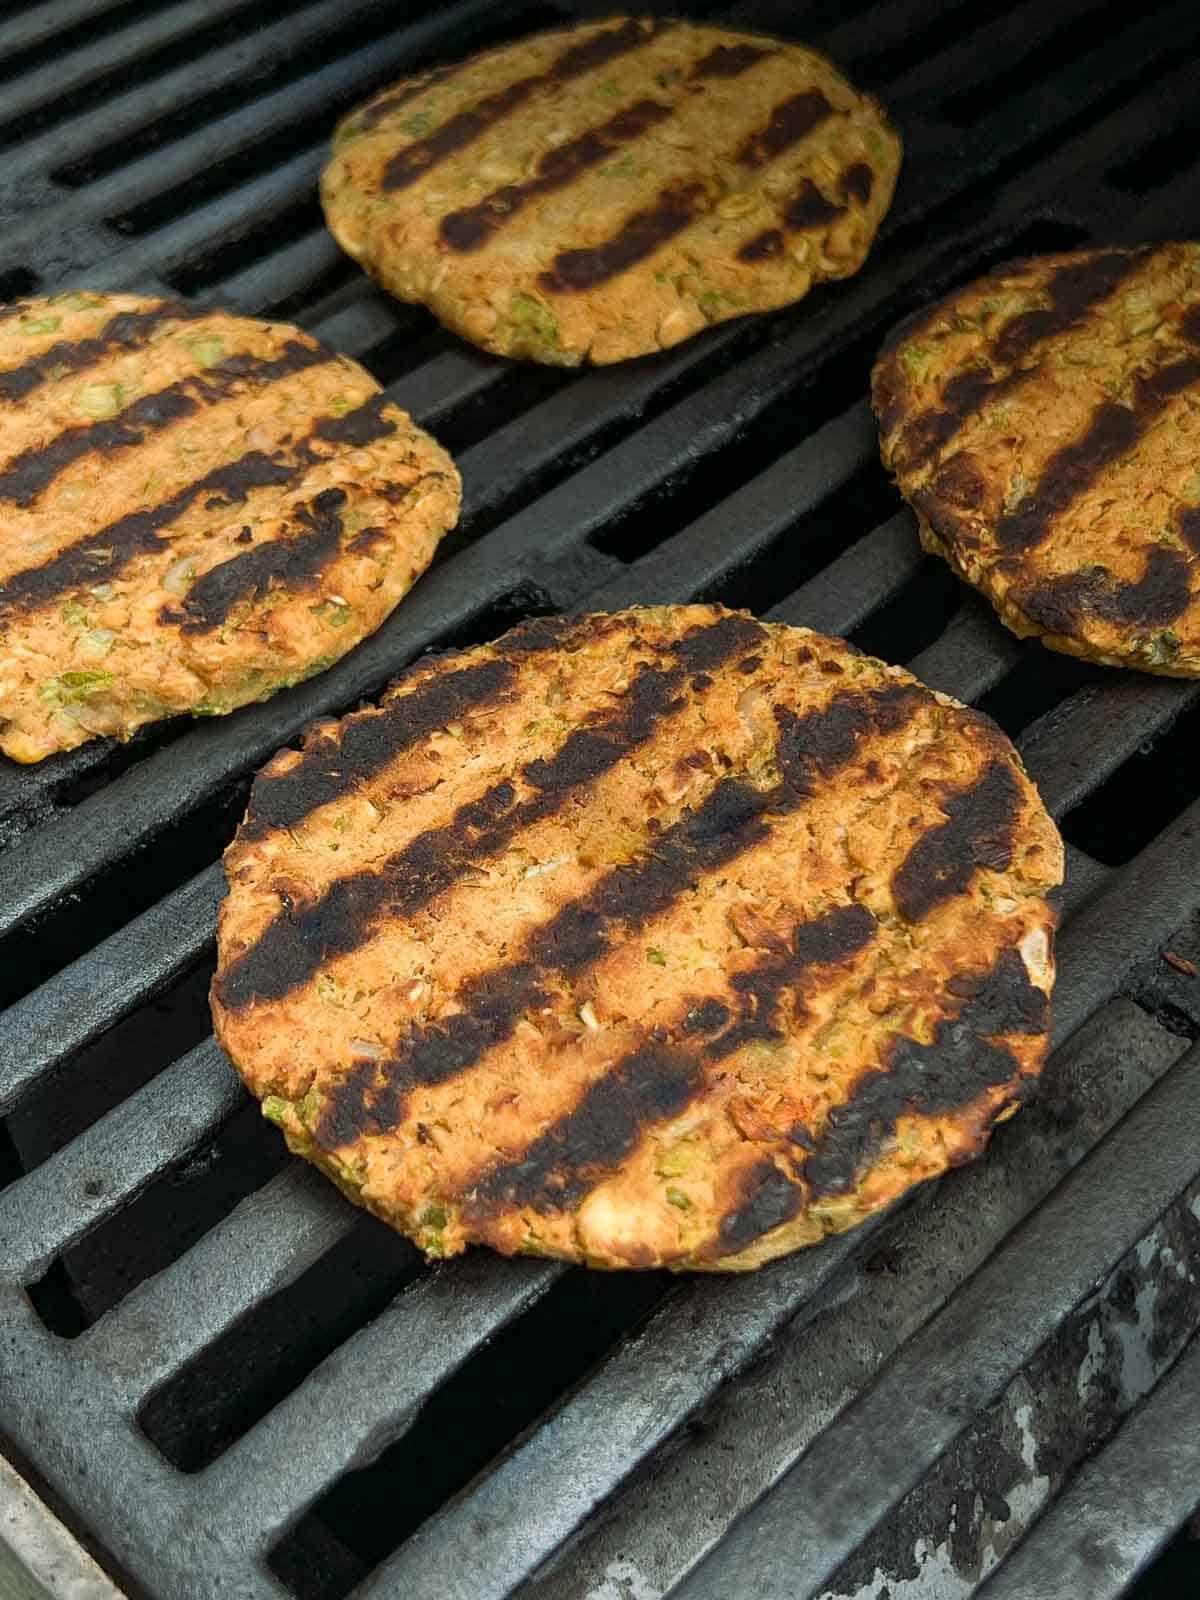 upside down chickpea burgers after turning them, with grill marks